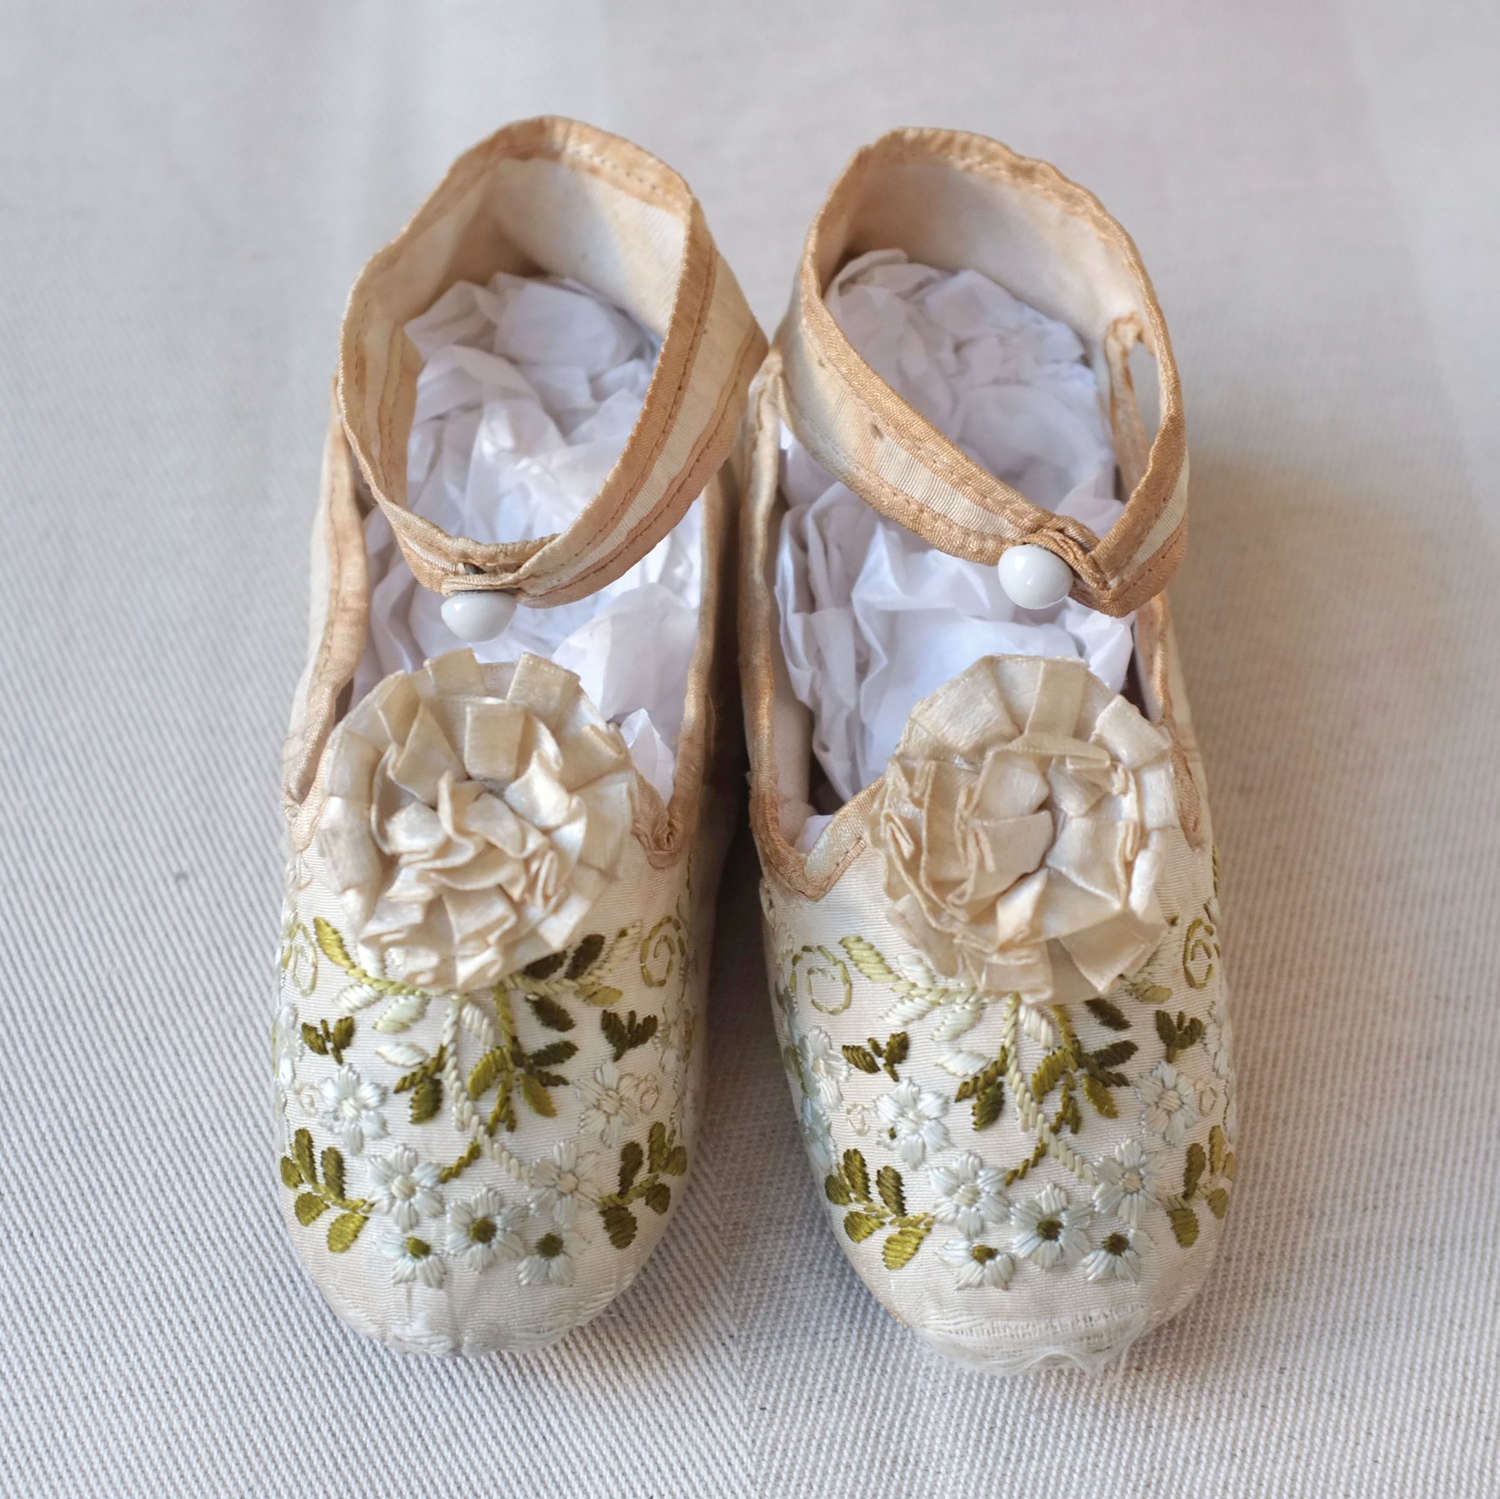 Antique Embroidered Child's Silk Shoes with Rosettes